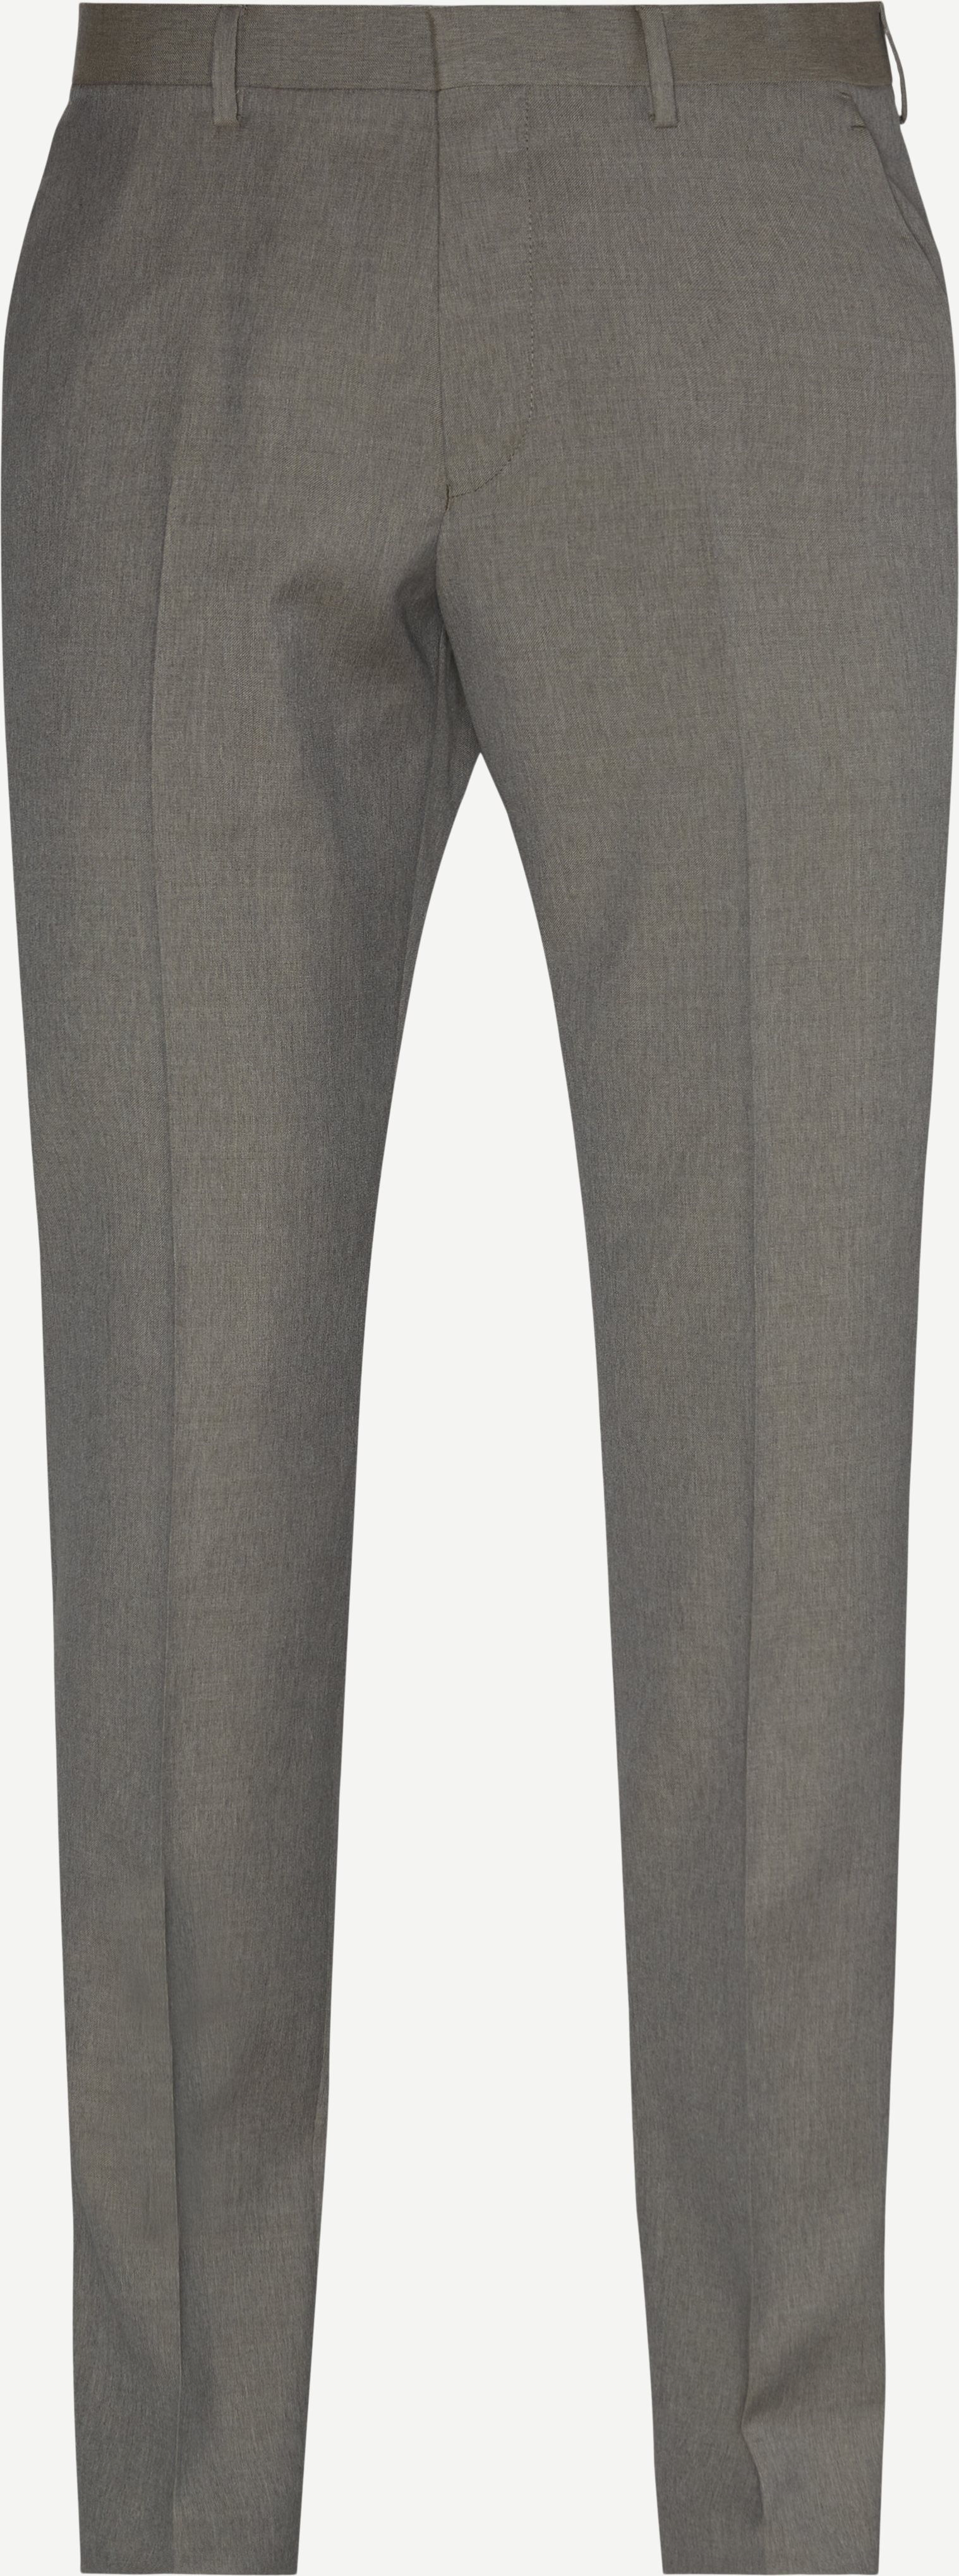 Trousers - Grey